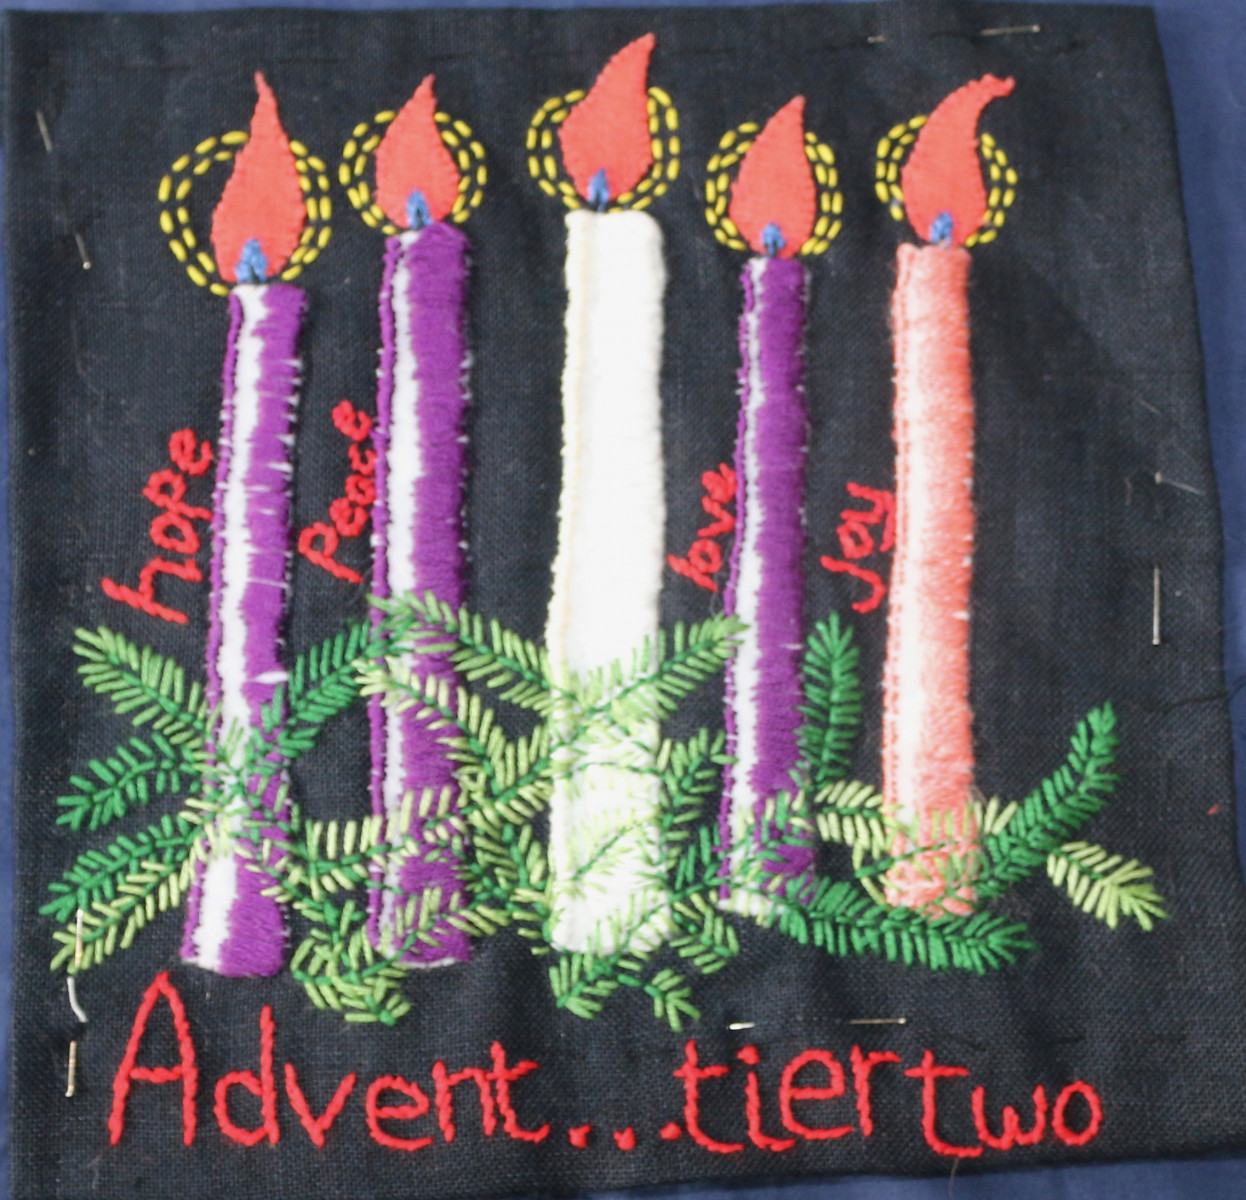 Embroidery of a fully lit Advent wreath